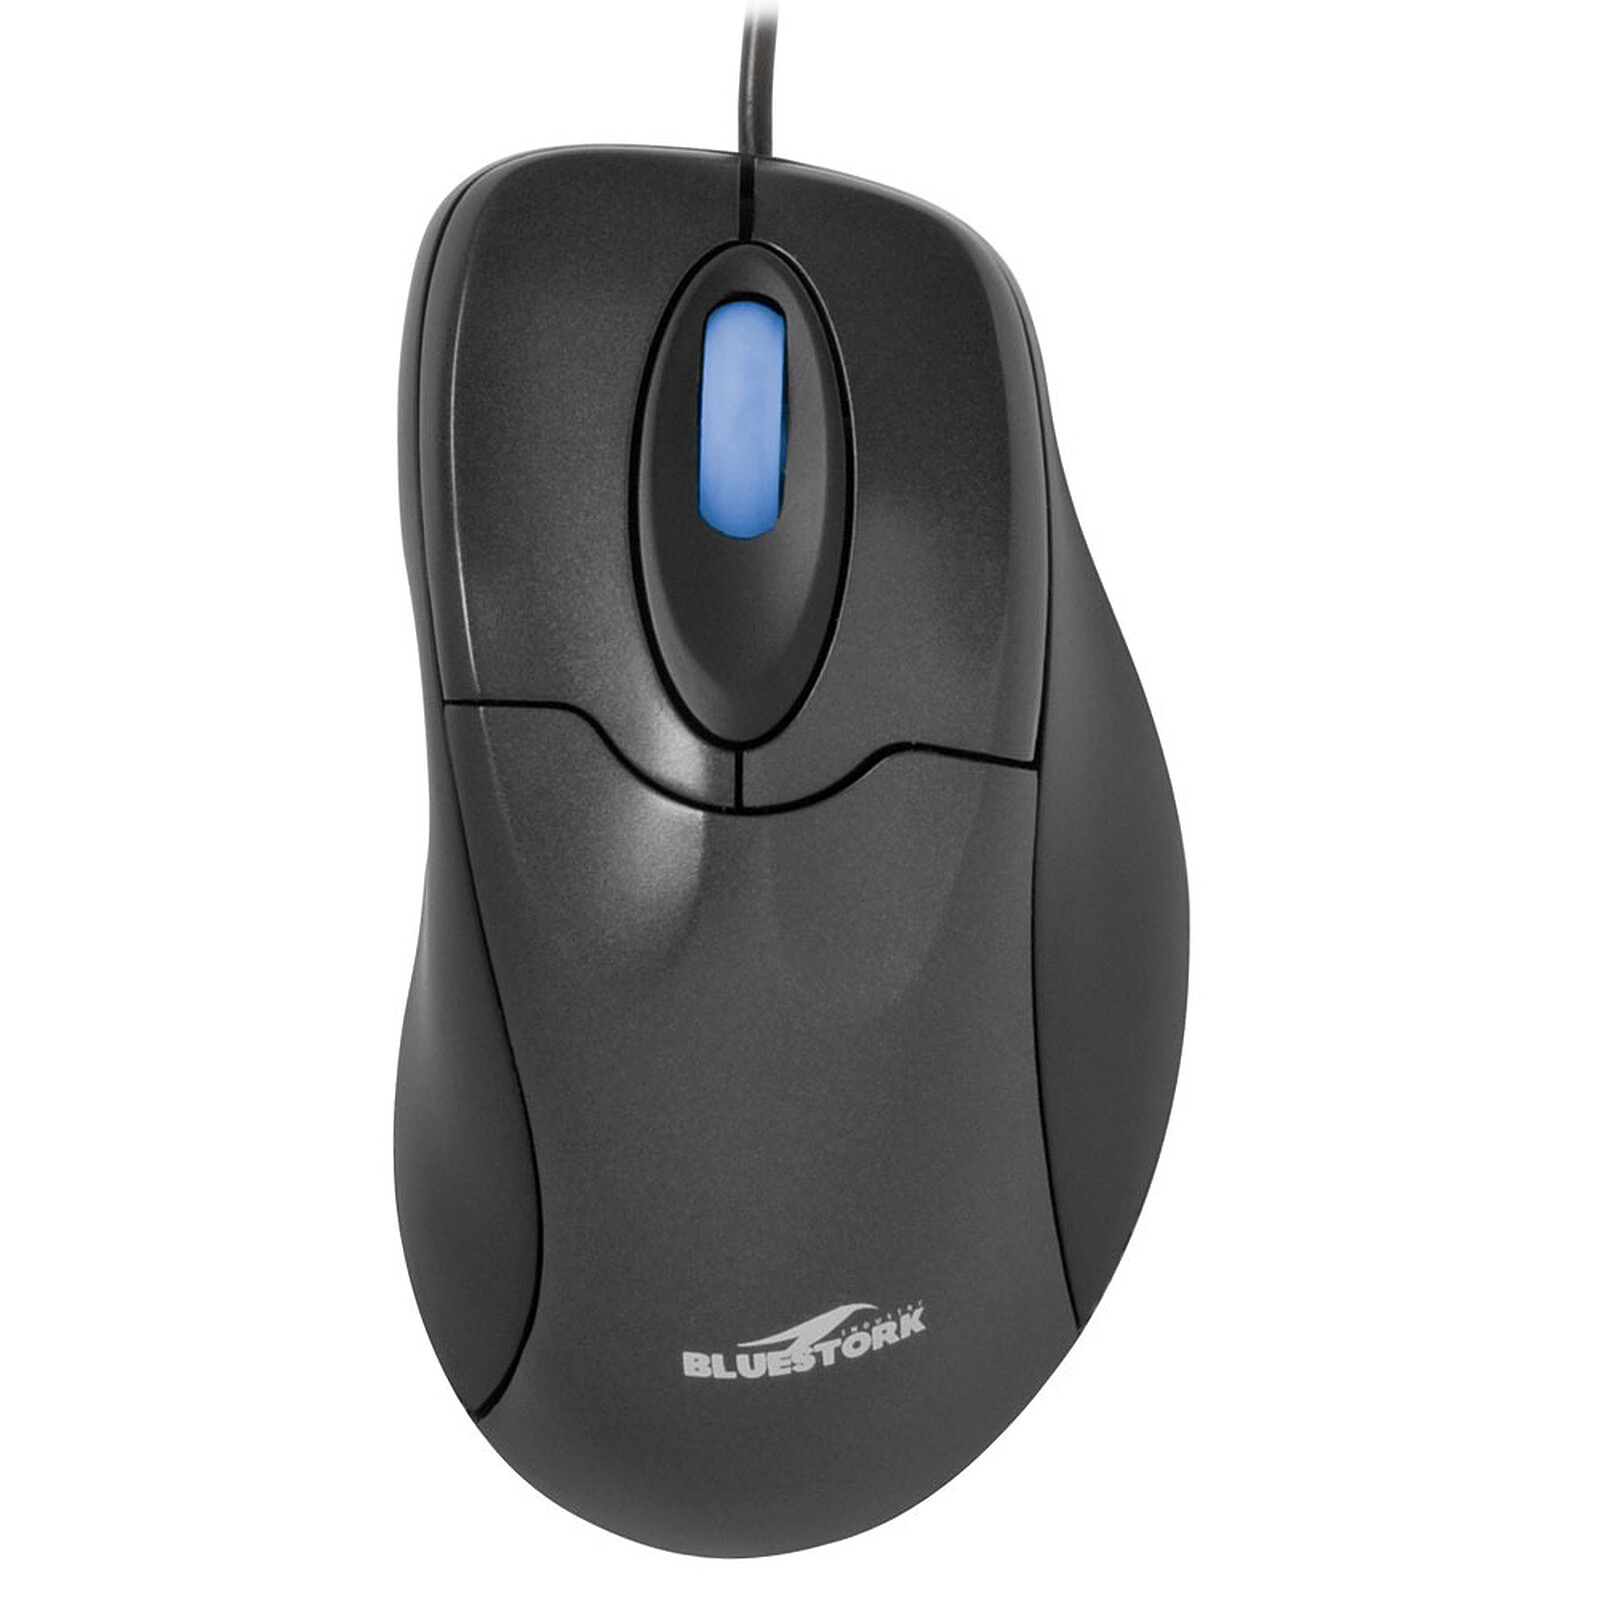 Mouse point. G2 mouse